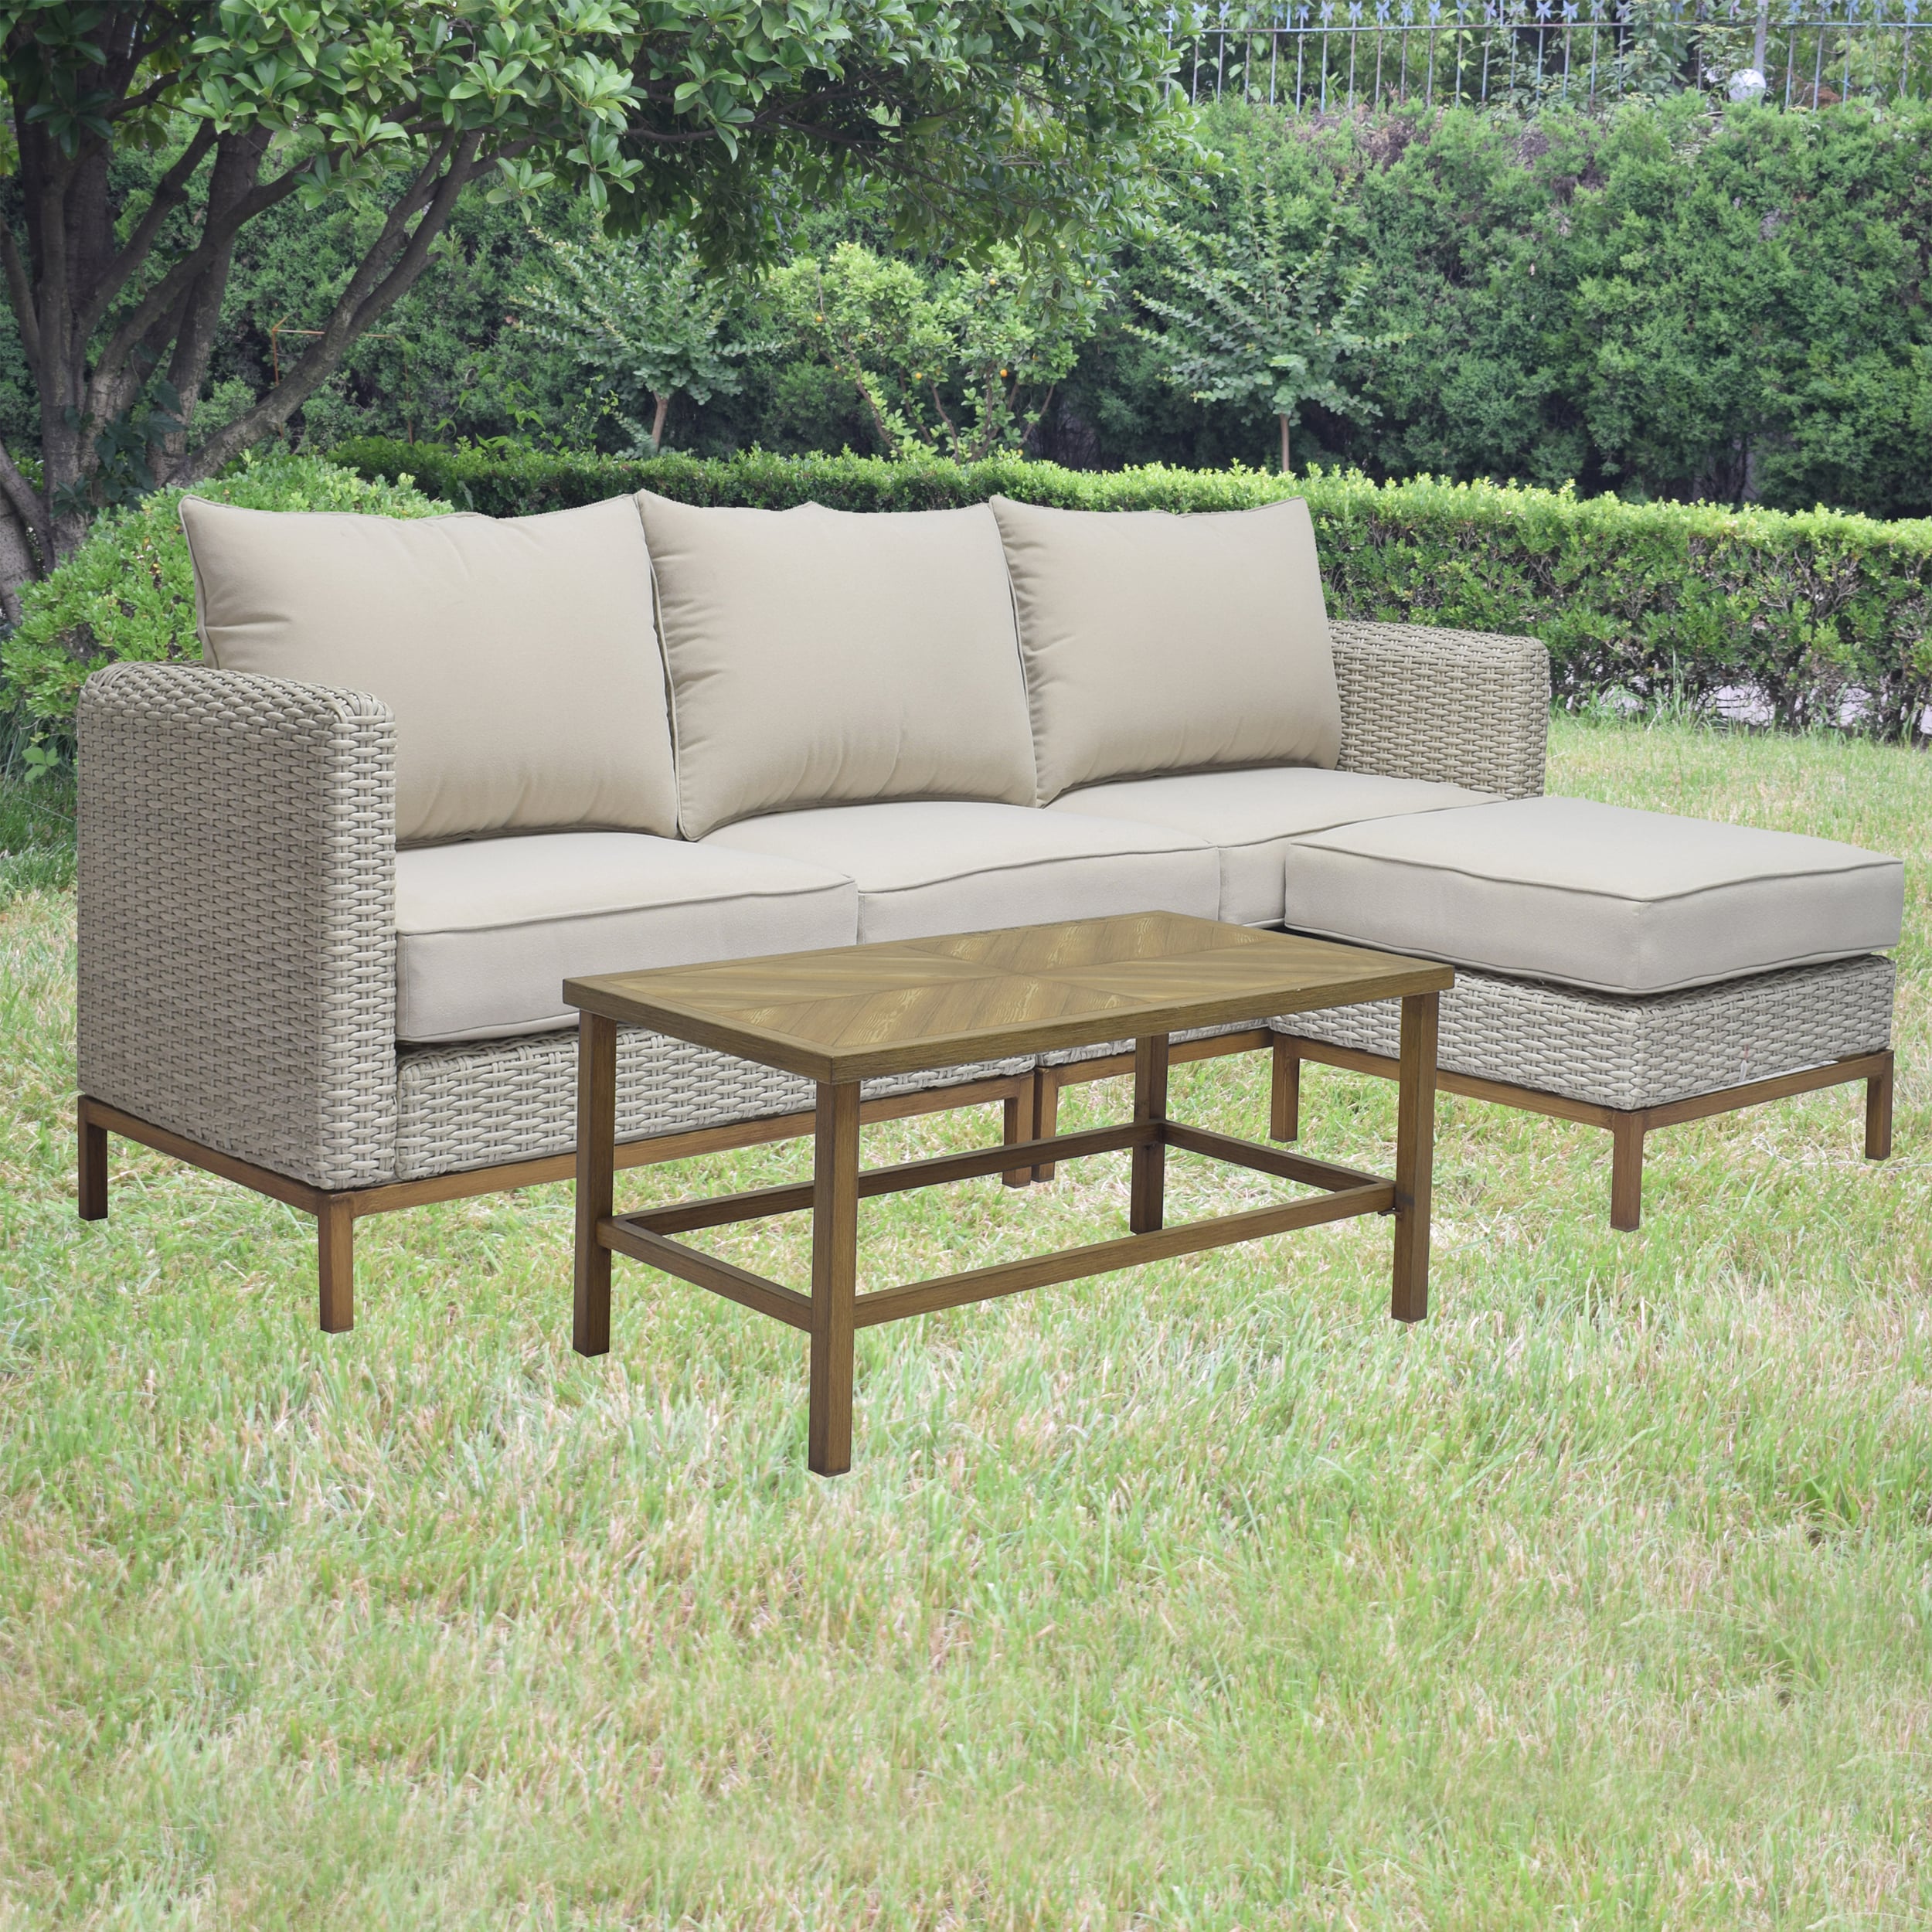 Origin 21 Veda Conversation Patio Set Off-white Conversation the Sets Patio with Springs at Cushions 4-Piece department in Wicker